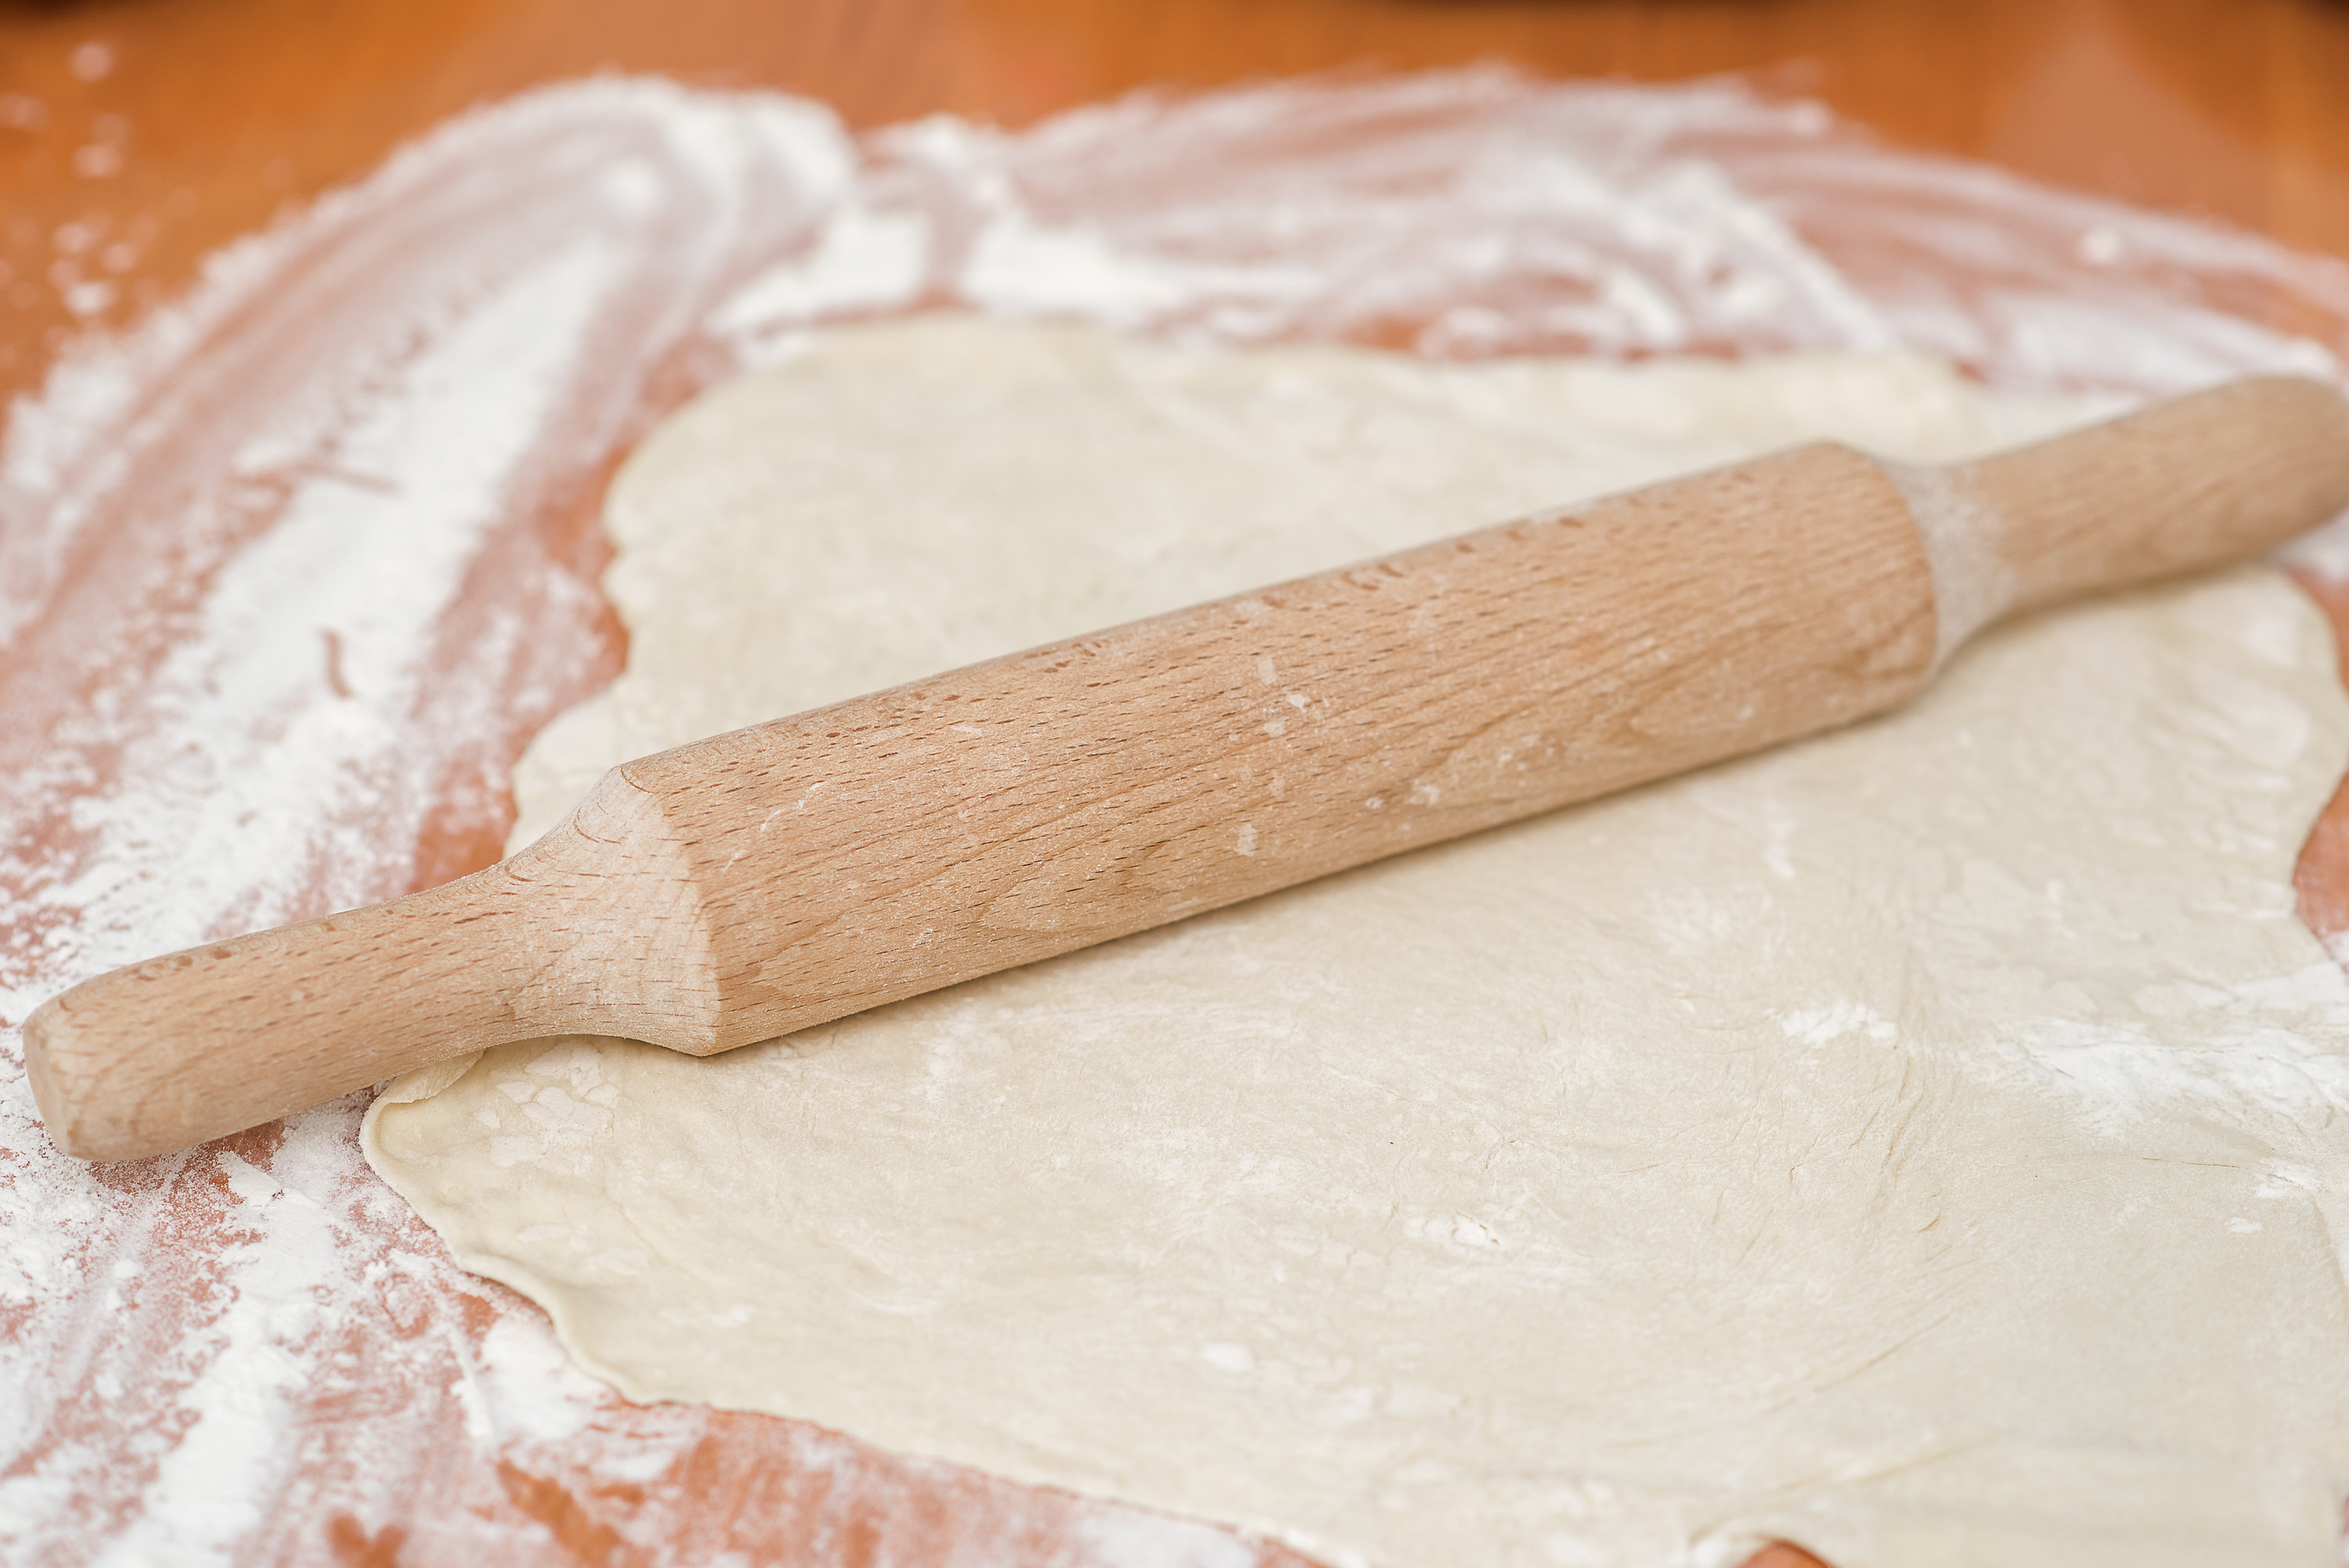 A wooden rolling pin rolls the dough sprinkled with flour.